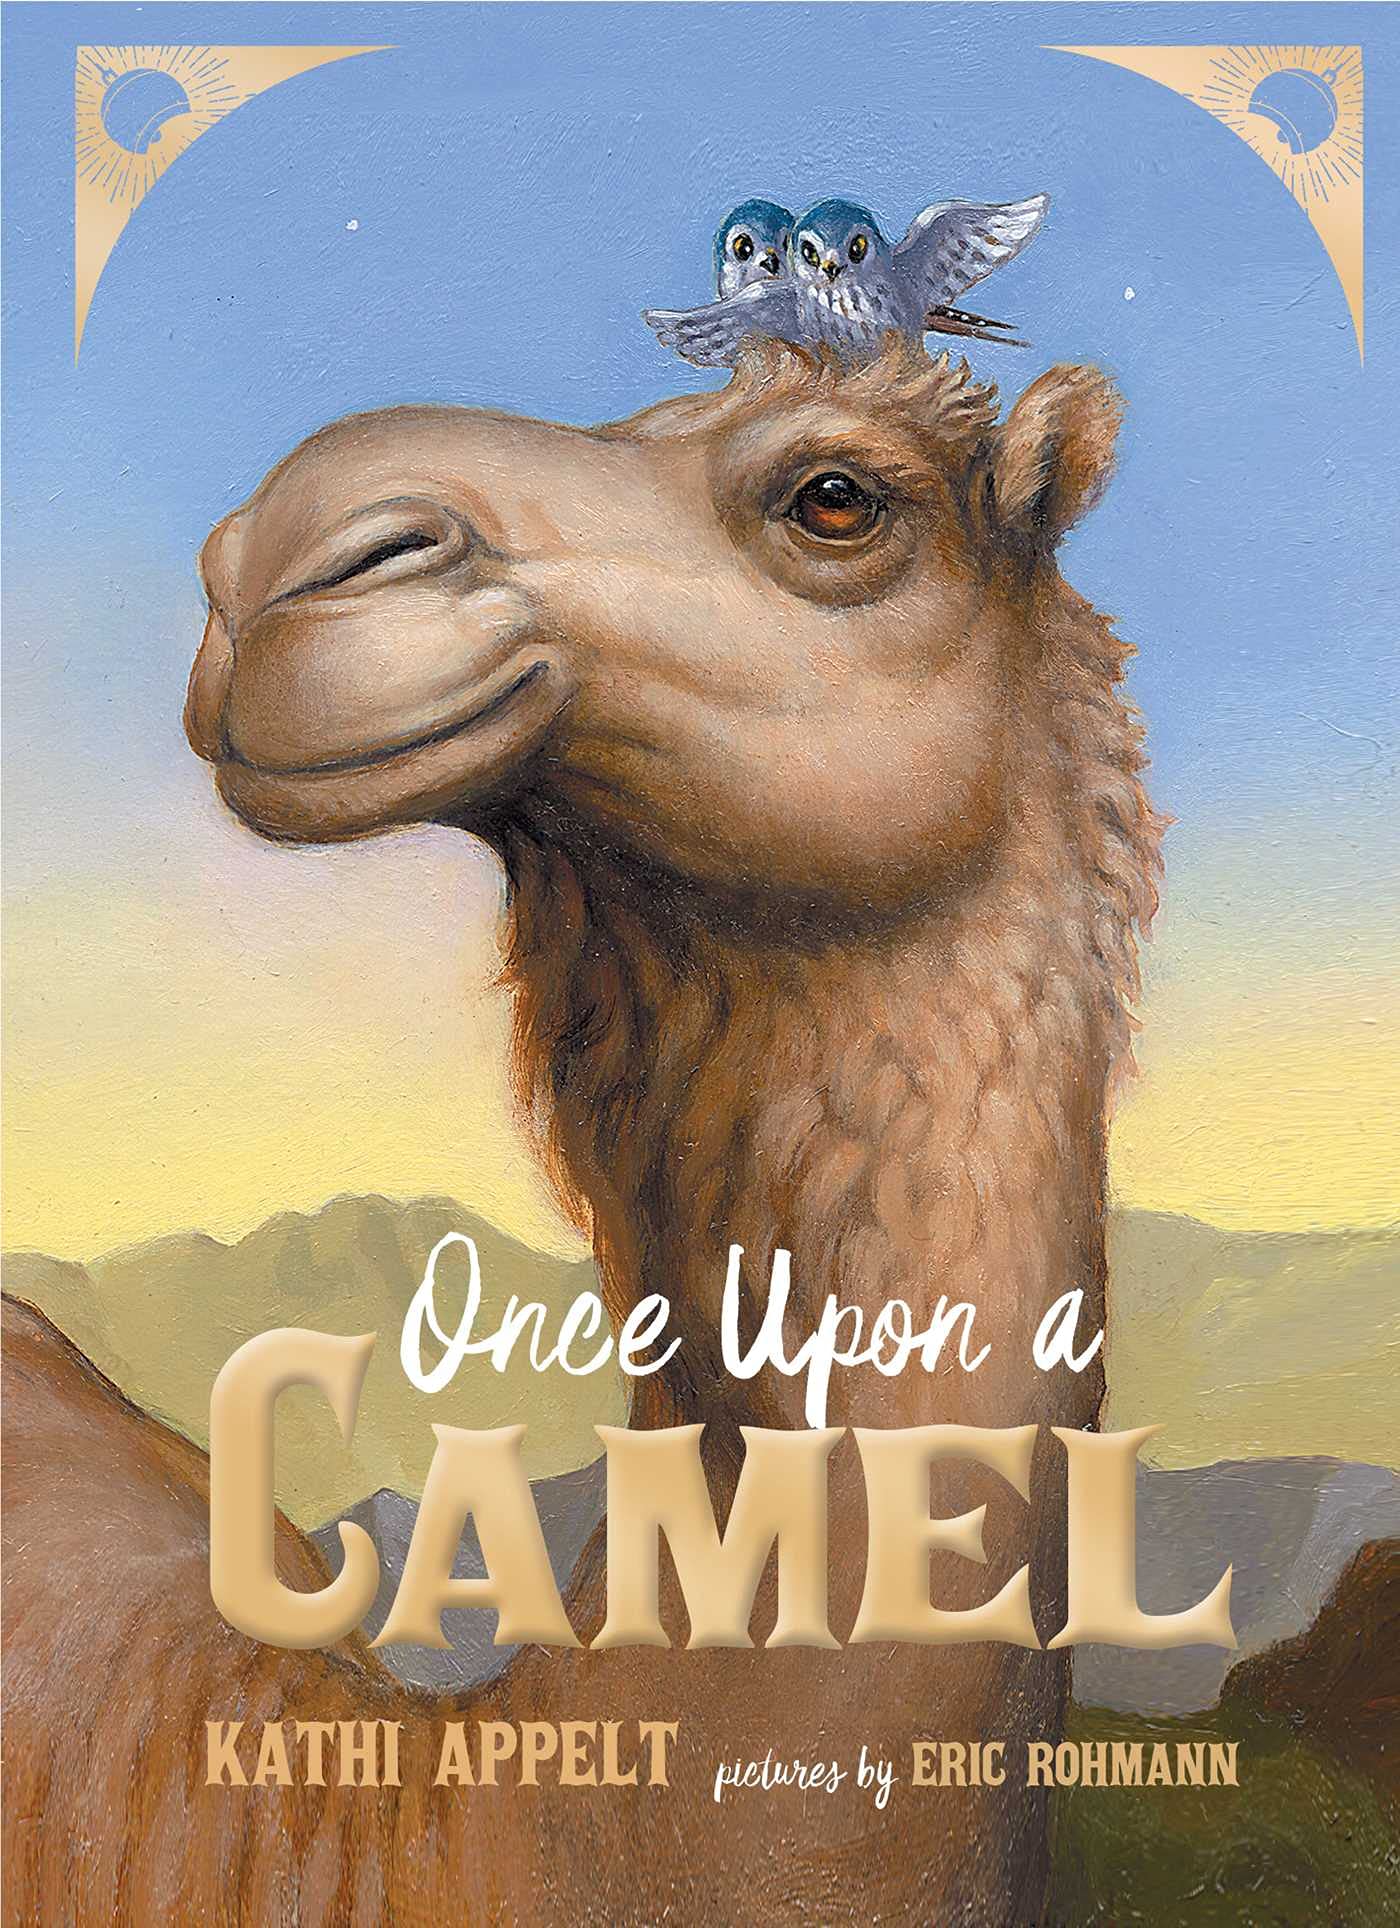 Image for "Once Upon a Camel"